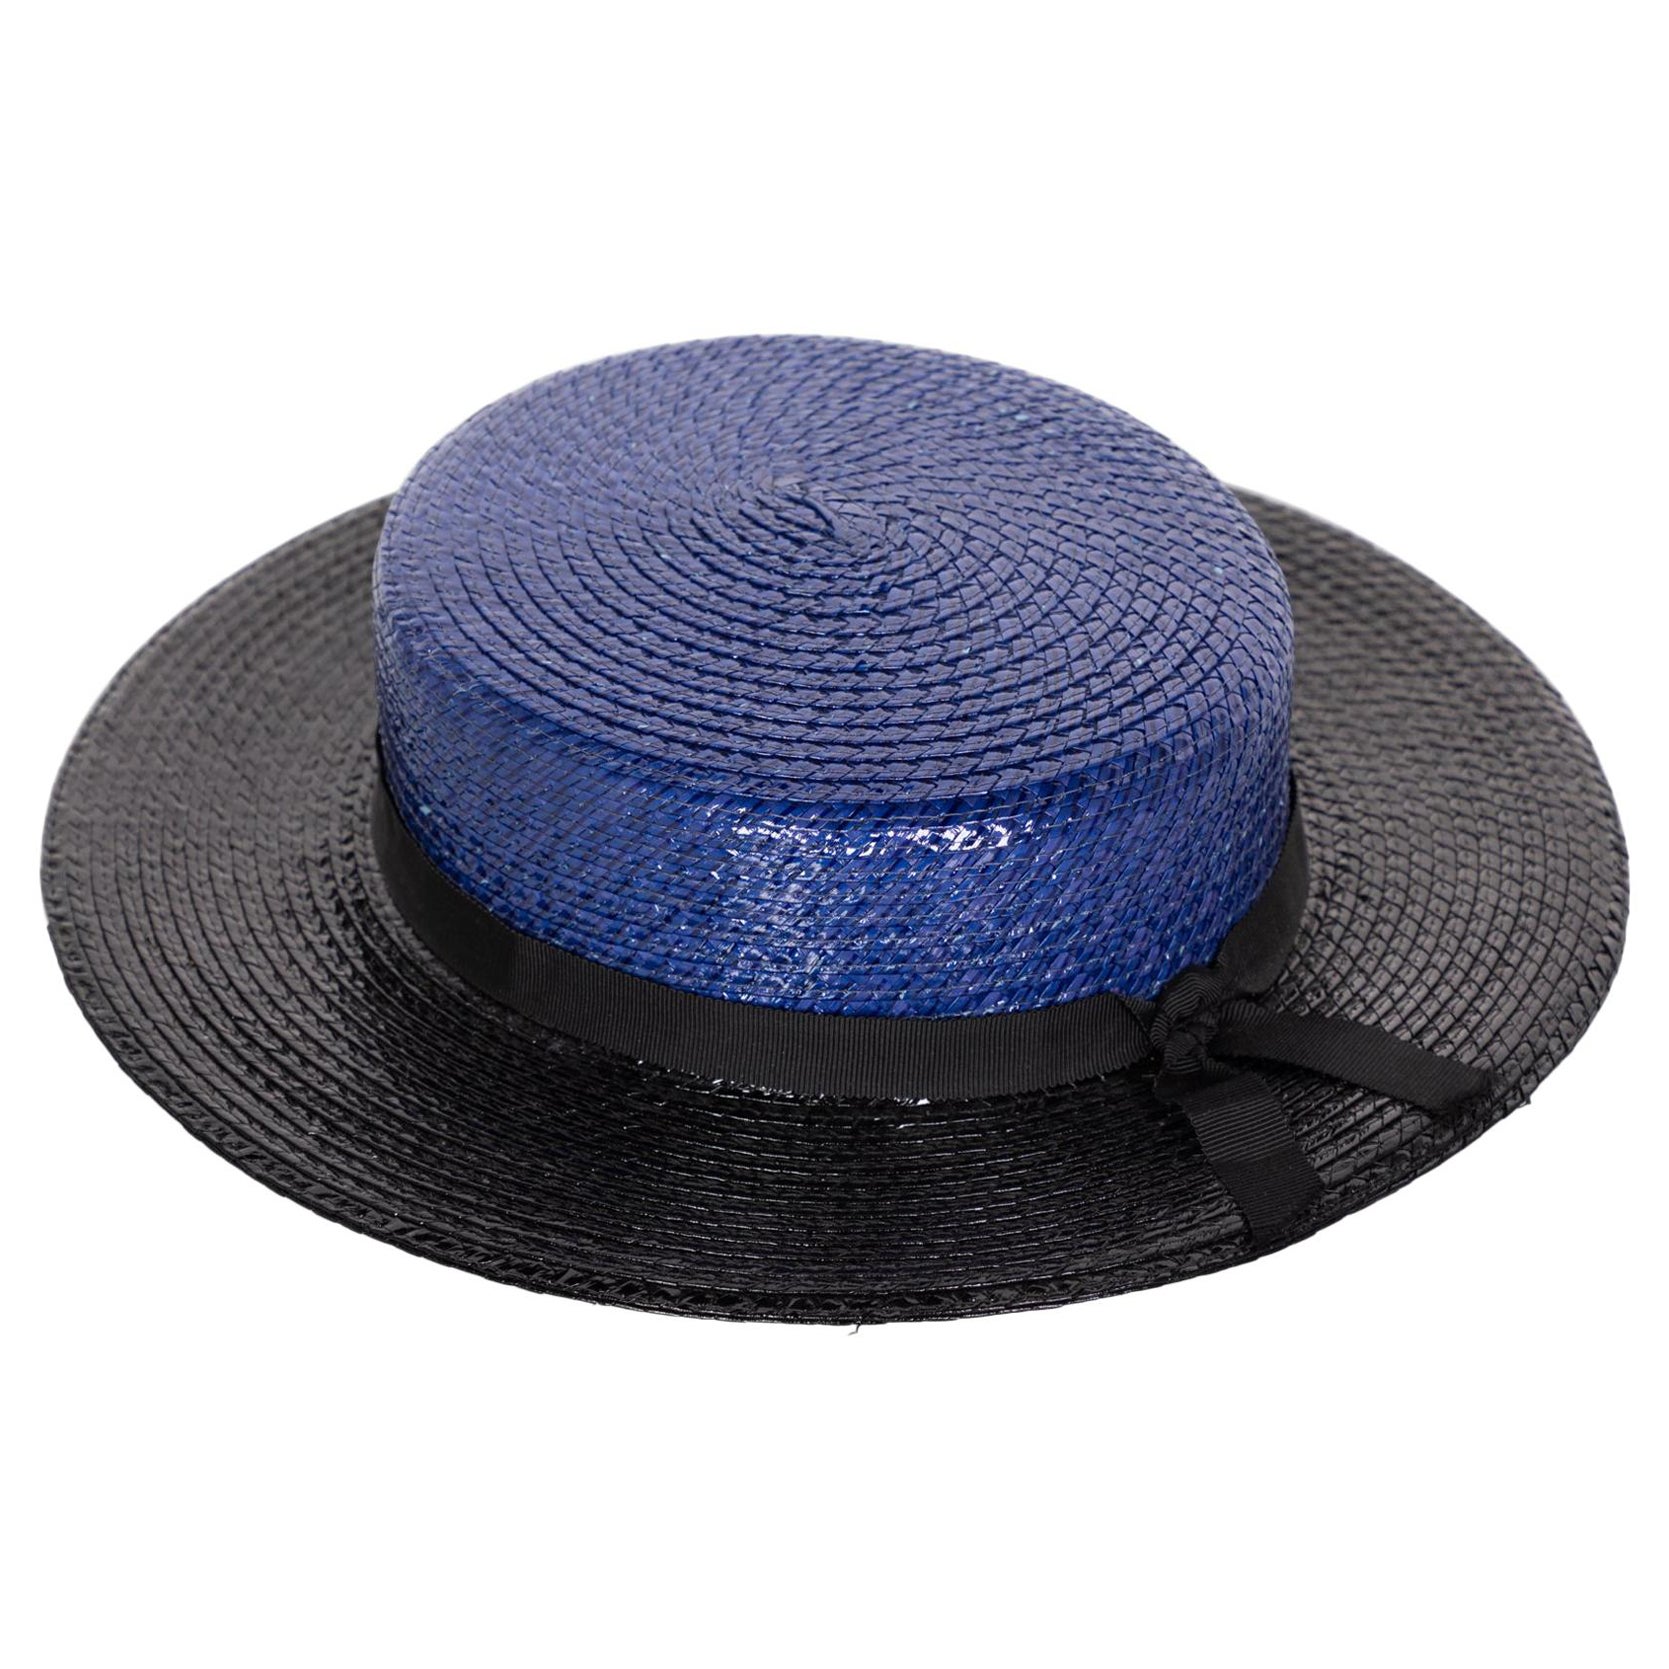 Yves Saint Laurent YSL Vintage Glossy Blue and Black Straw Hat, 1990s For Sale